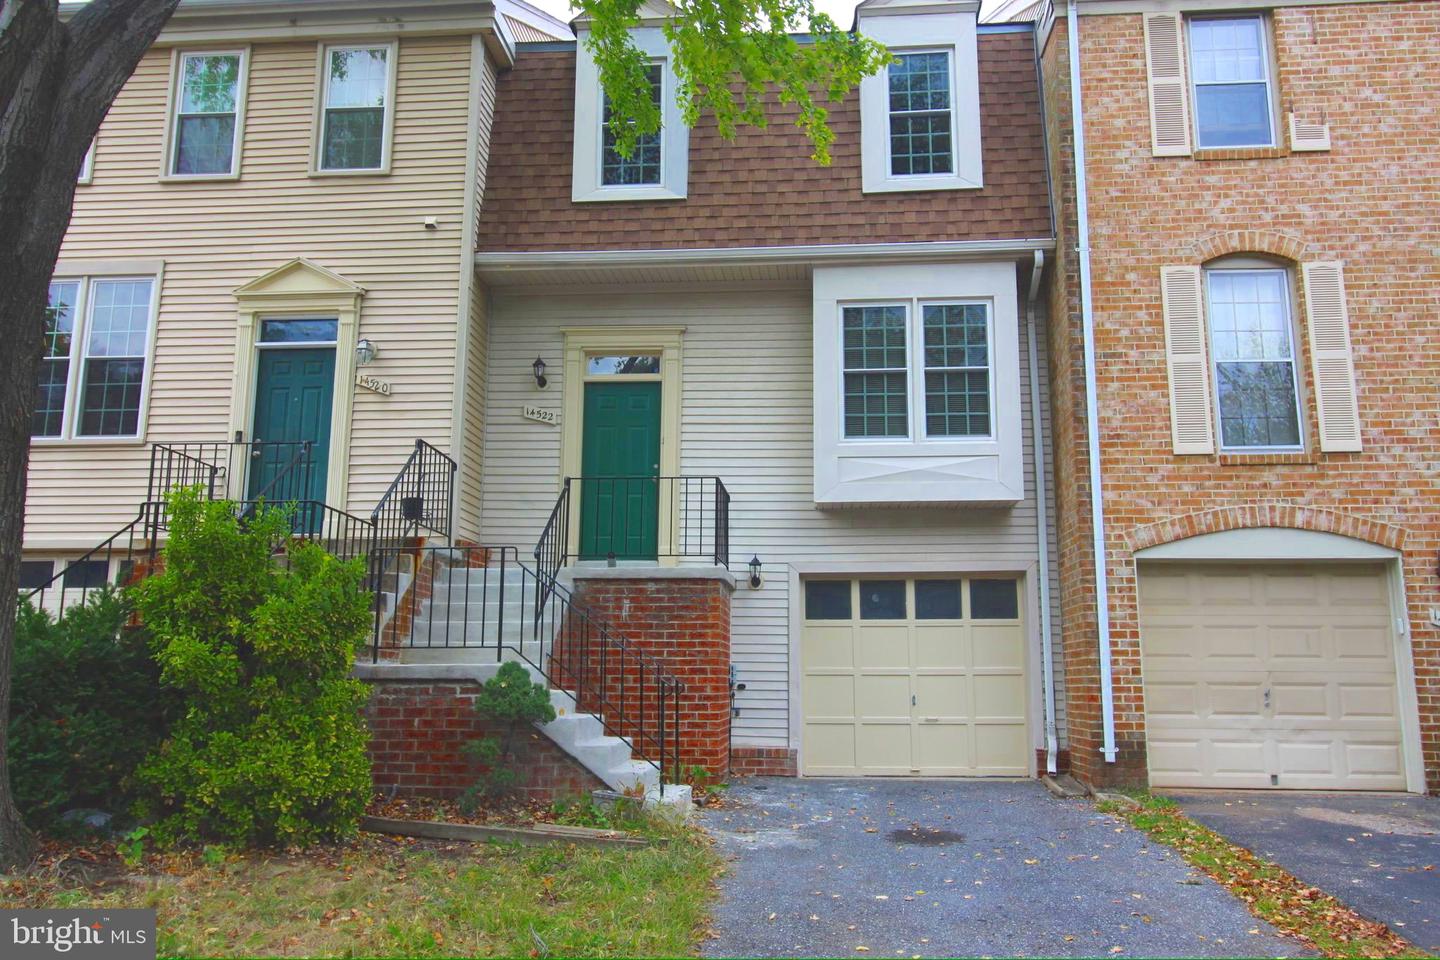 View Laurel, MD 20707 townhome